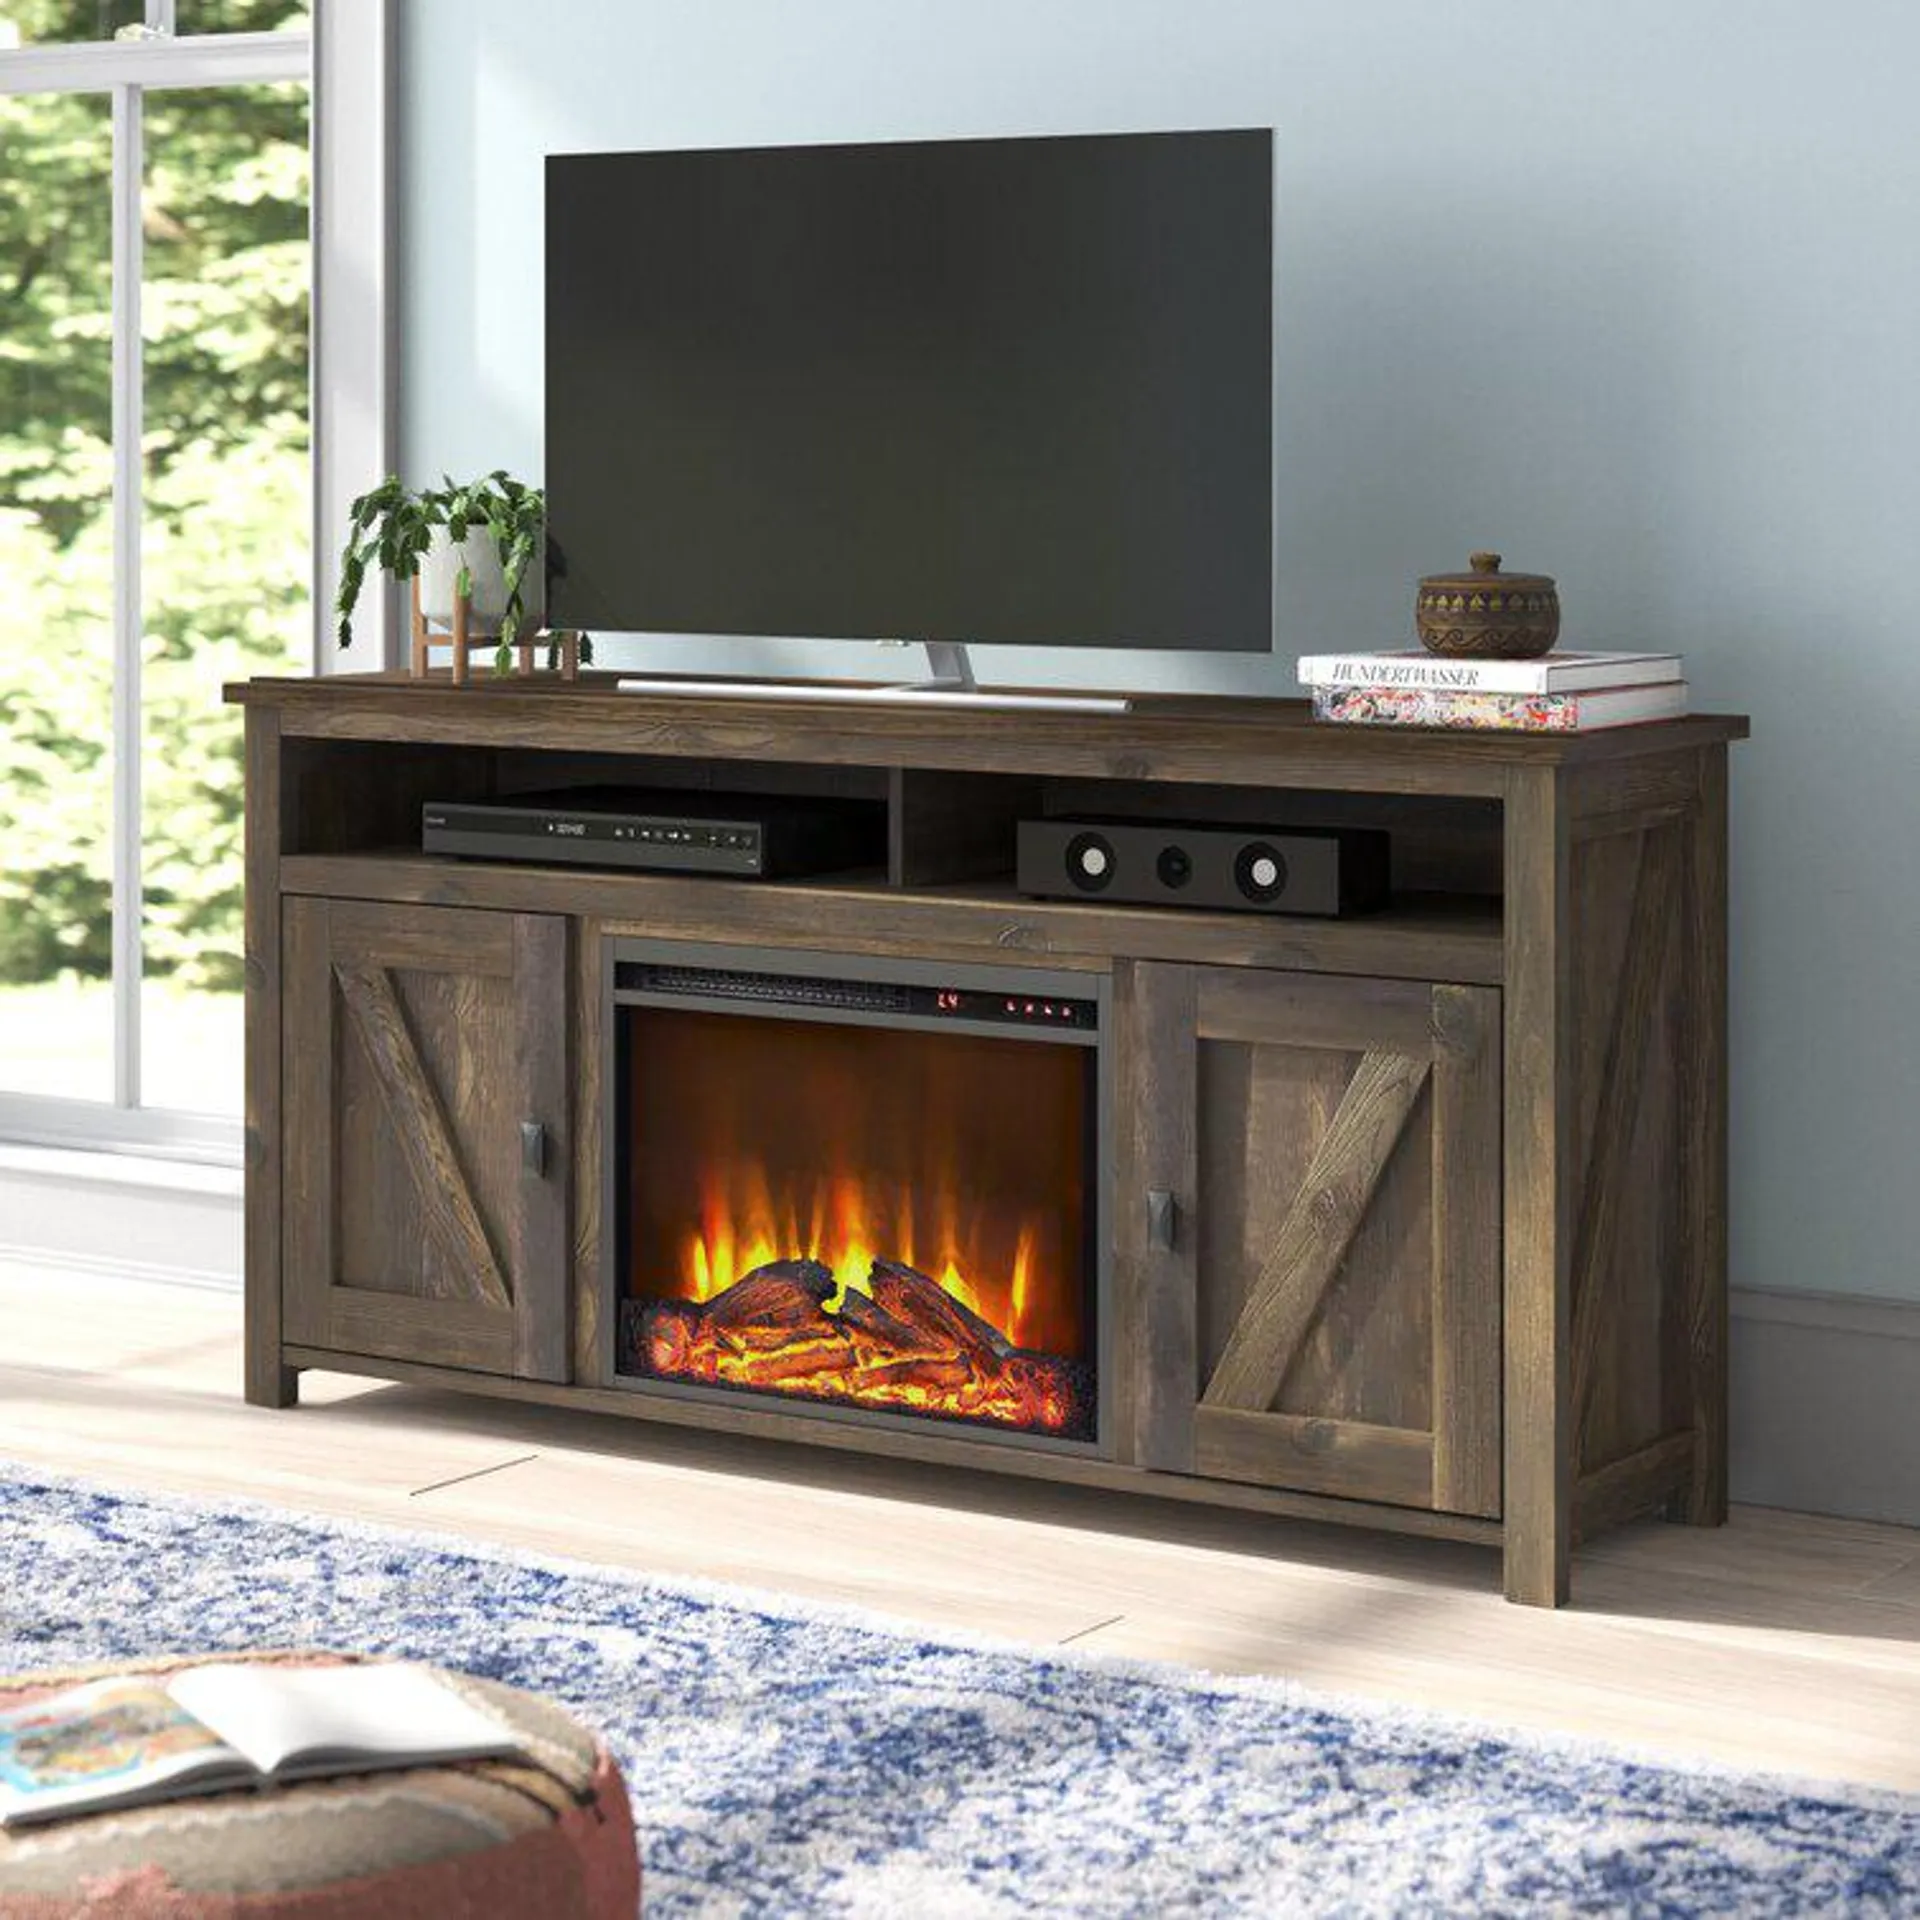 Whittier TV Stand for TVs up to 60" with Fireplace Included